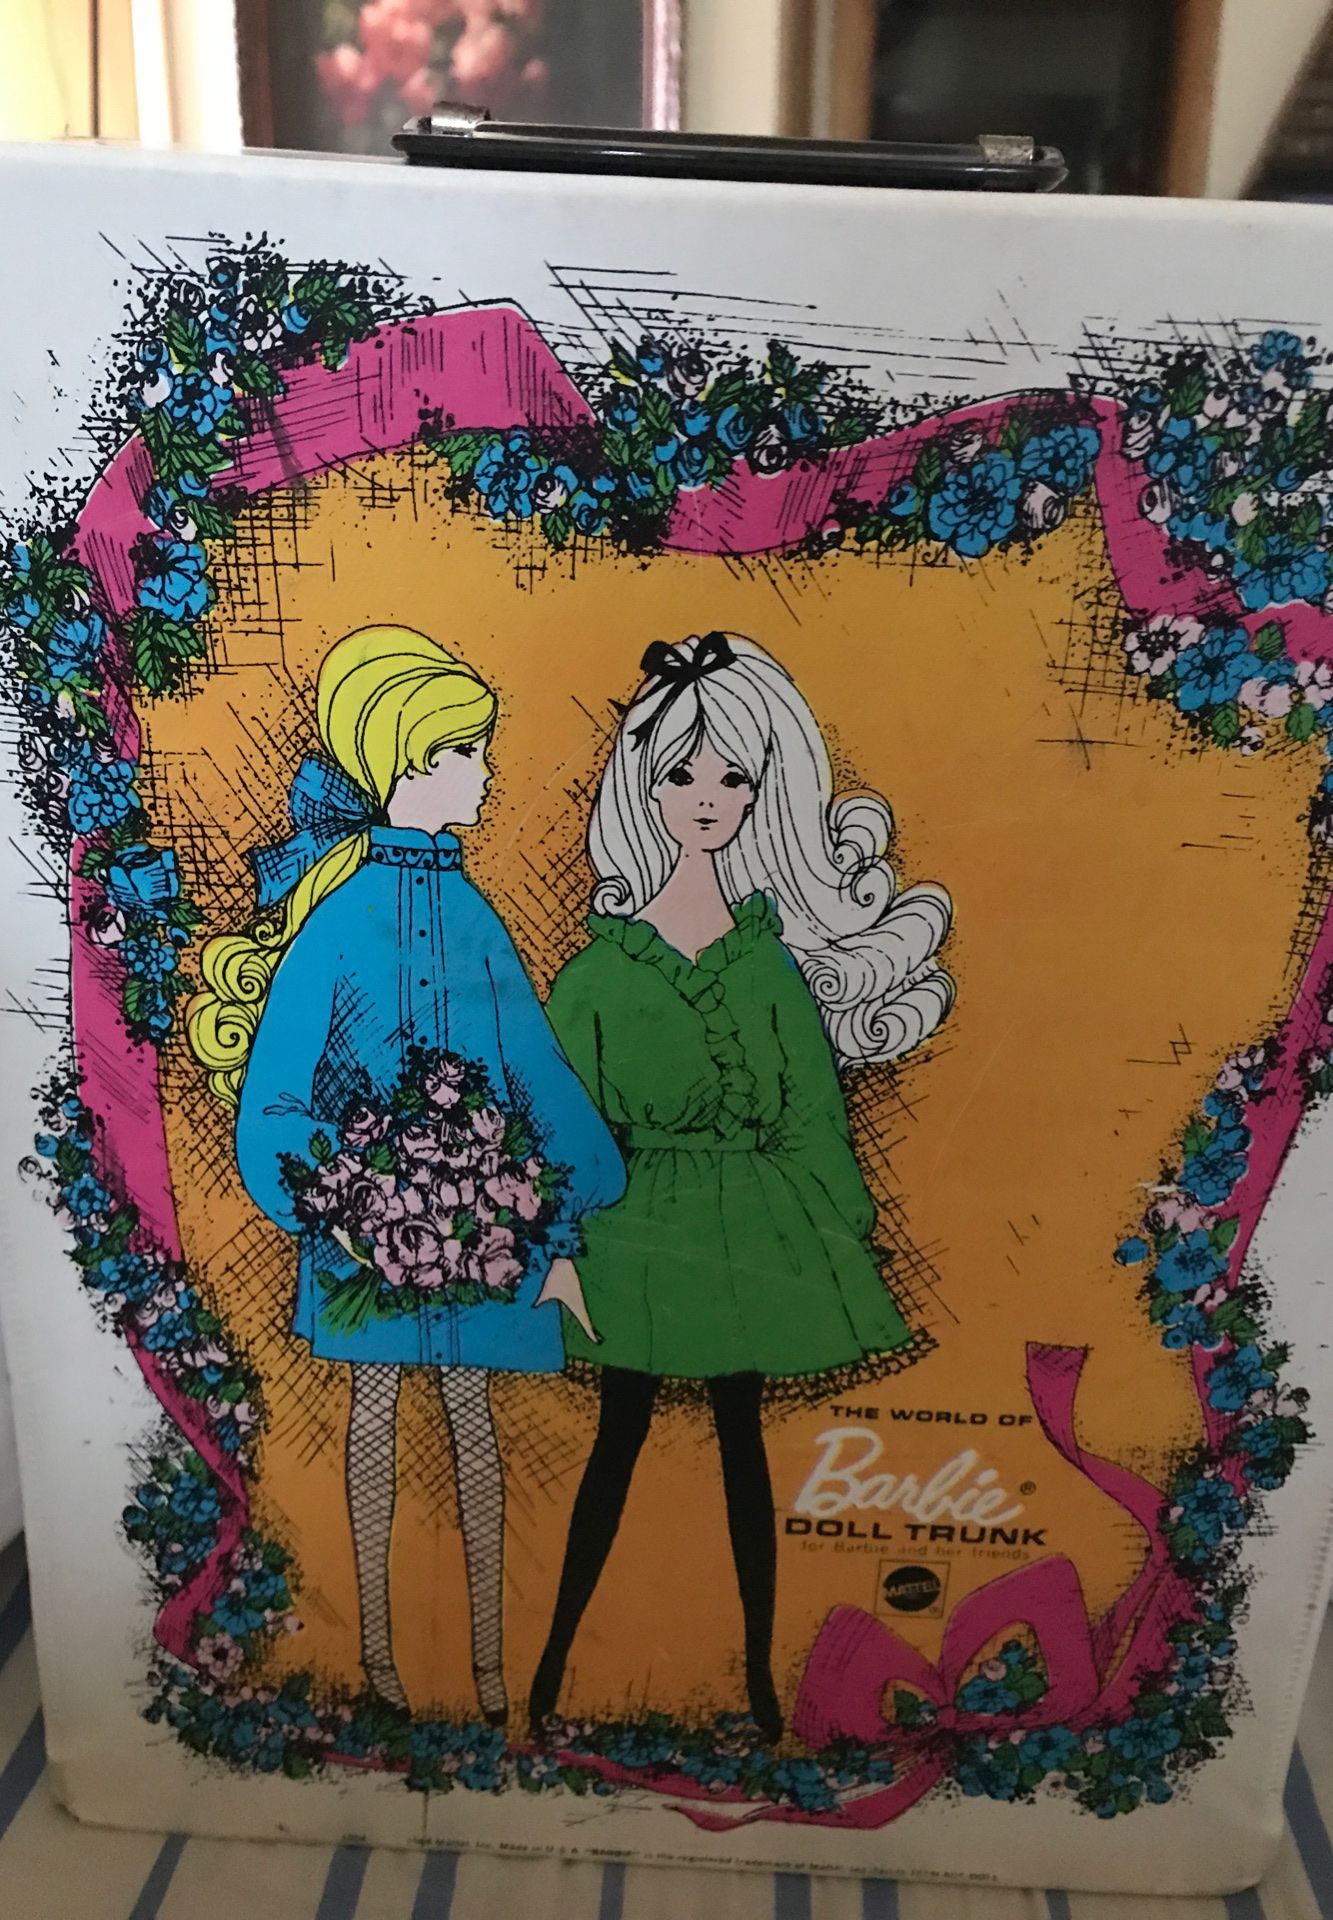 1968 Barbie and case